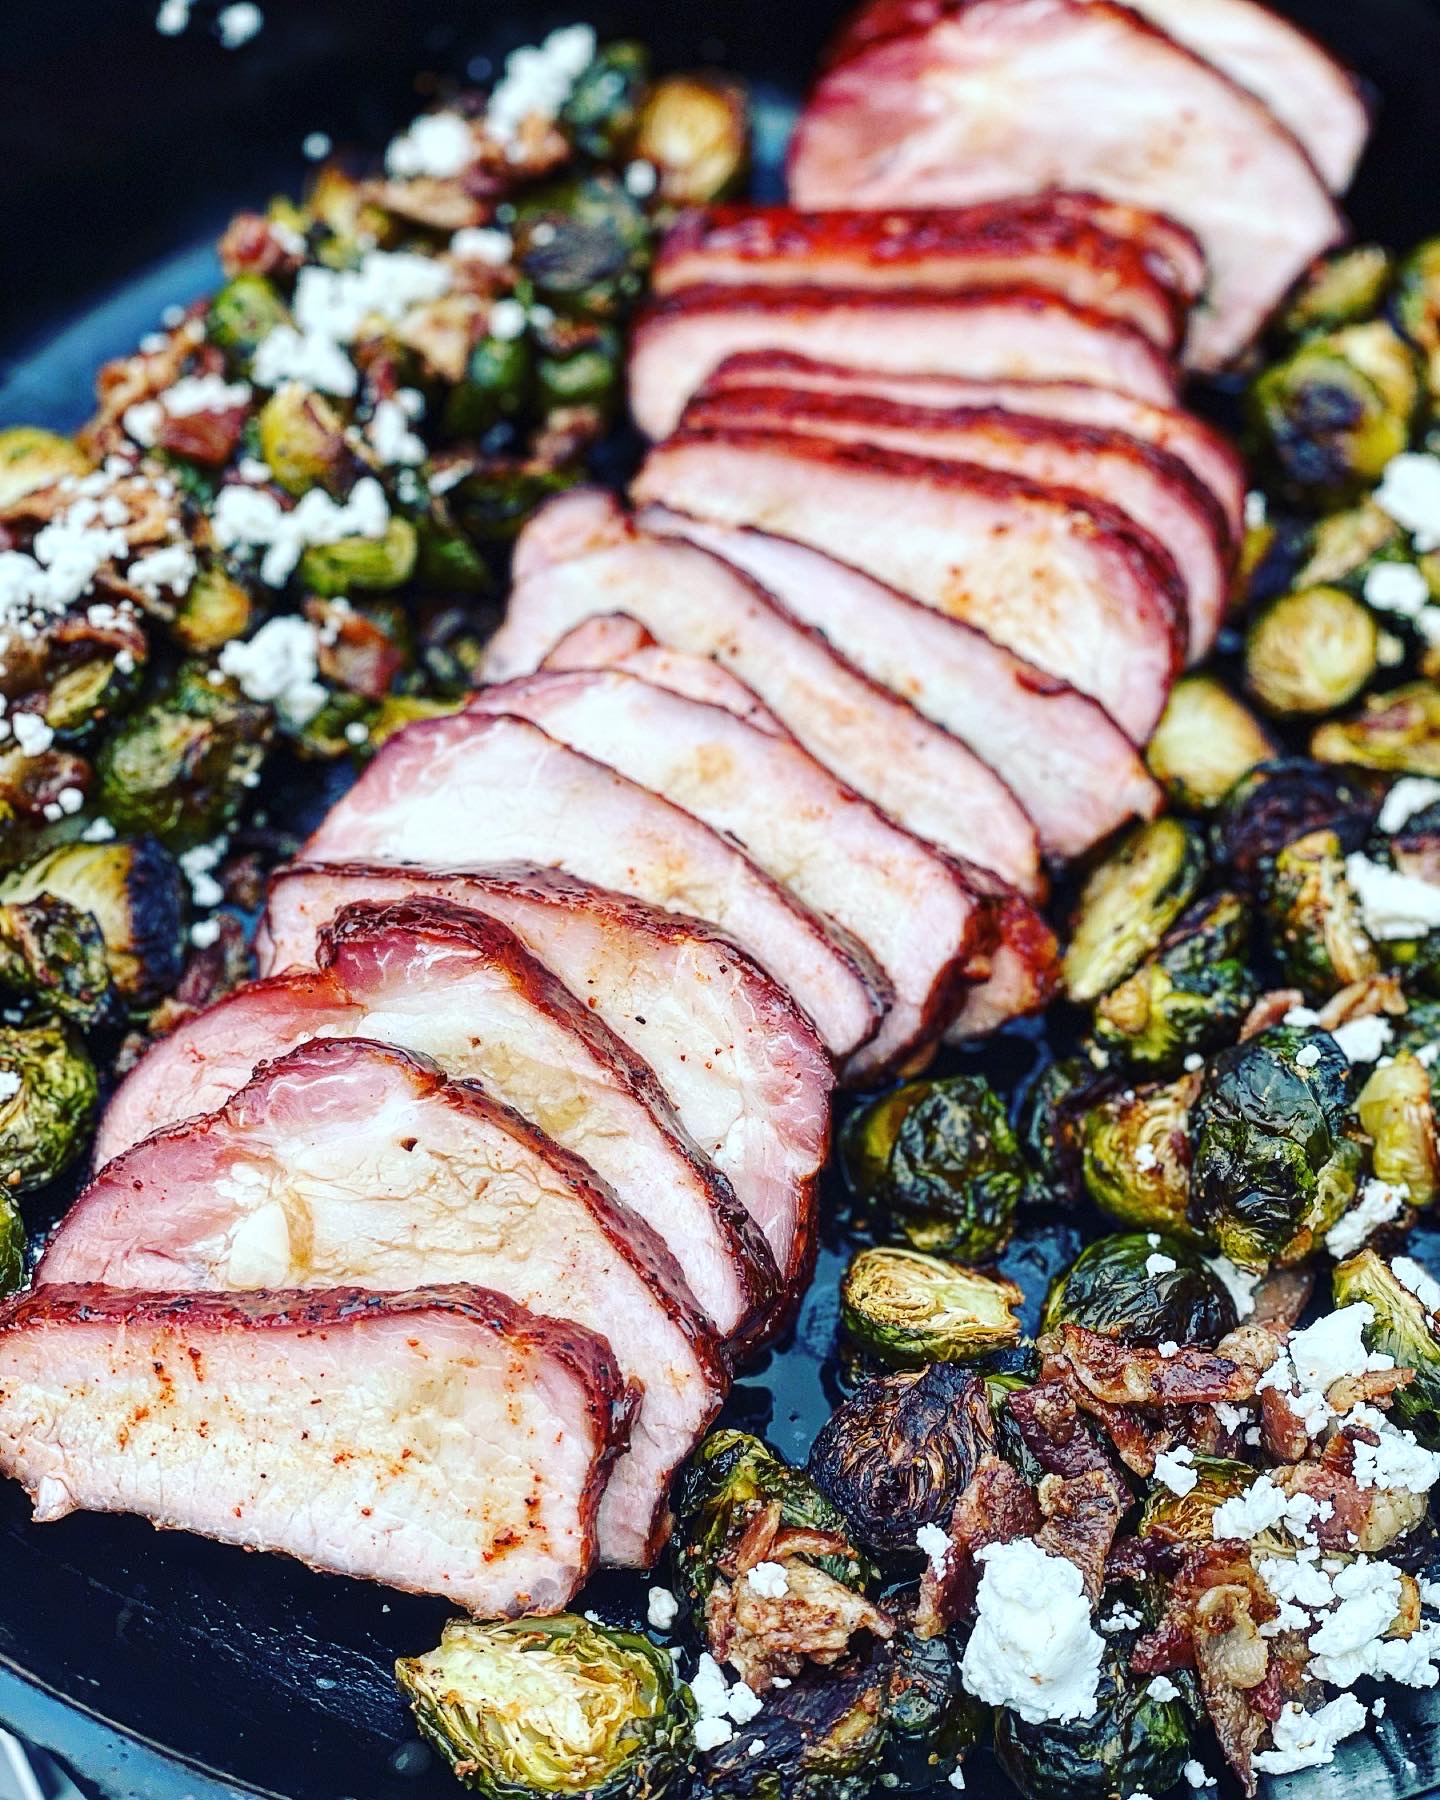 Joe’s Smoked Pork Loin with Candied Bacon Brussels Sprouts with a Balsamic Glaze